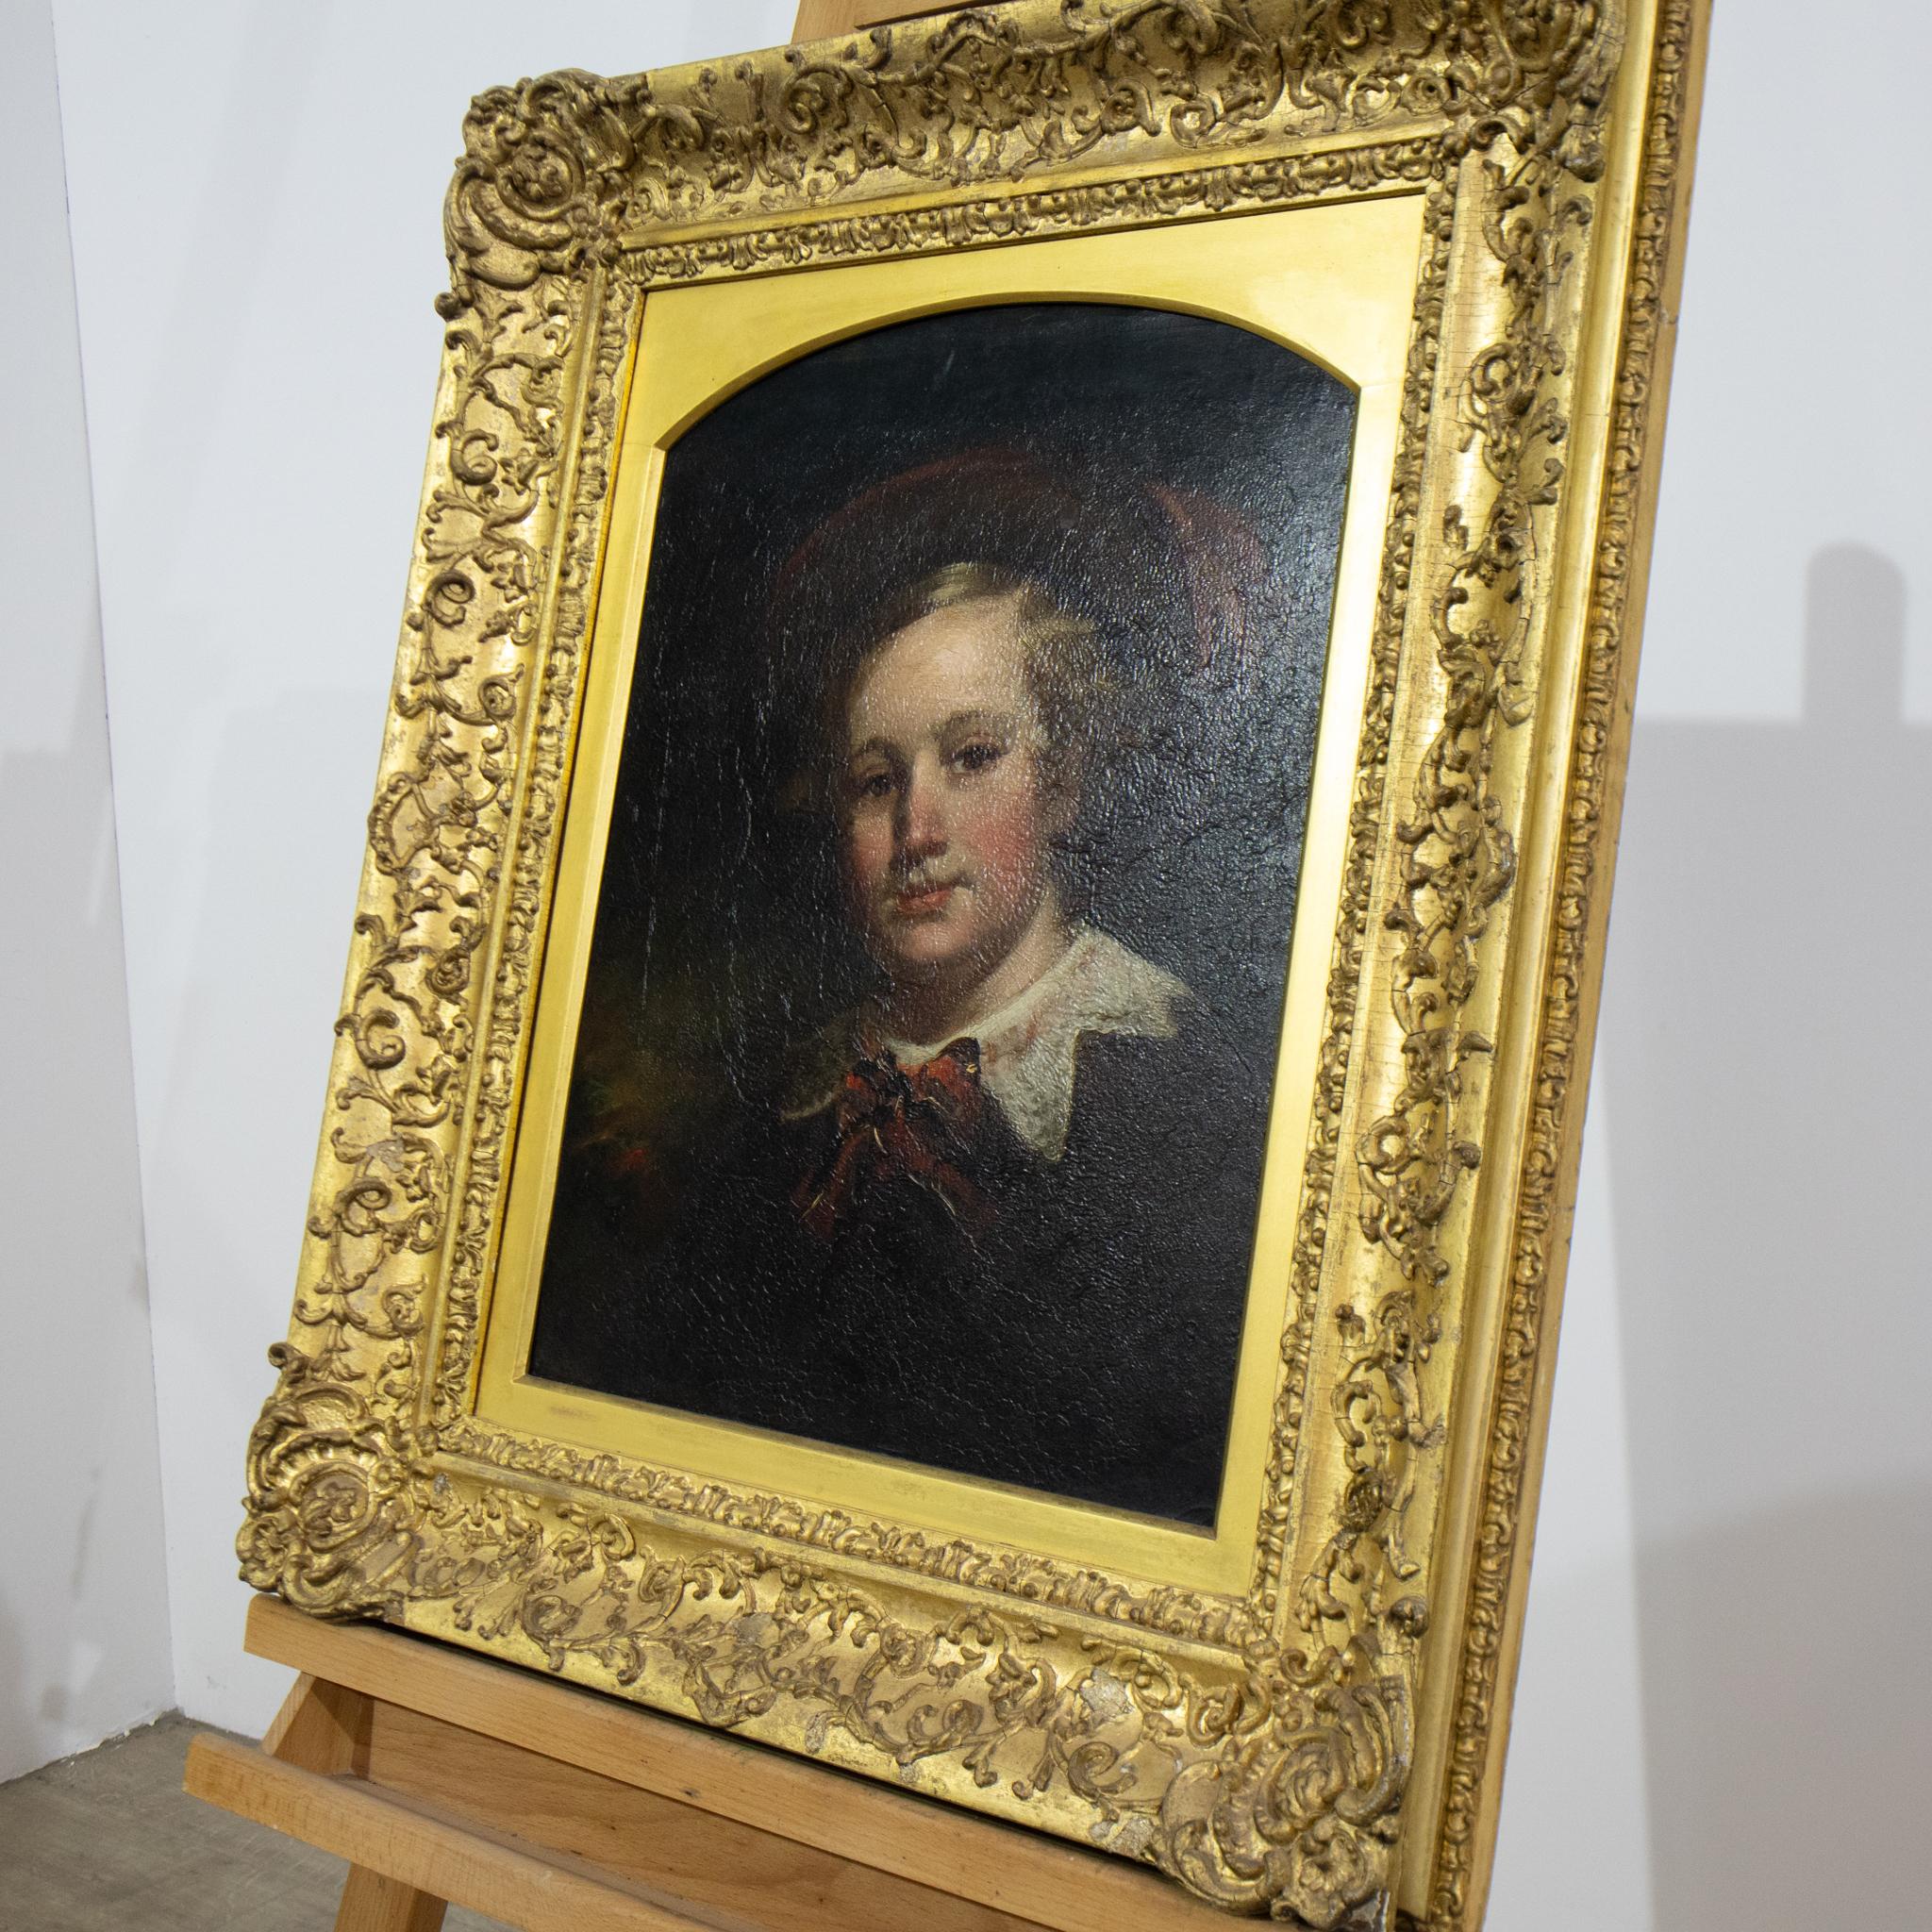 An attractive 19th century painting of a young boy in a feathered hat with a white collar, this is unsigned oil on board and in an original ornately decorated gilt frame. With tones of dark red and brown, this is a great piece for a country home or